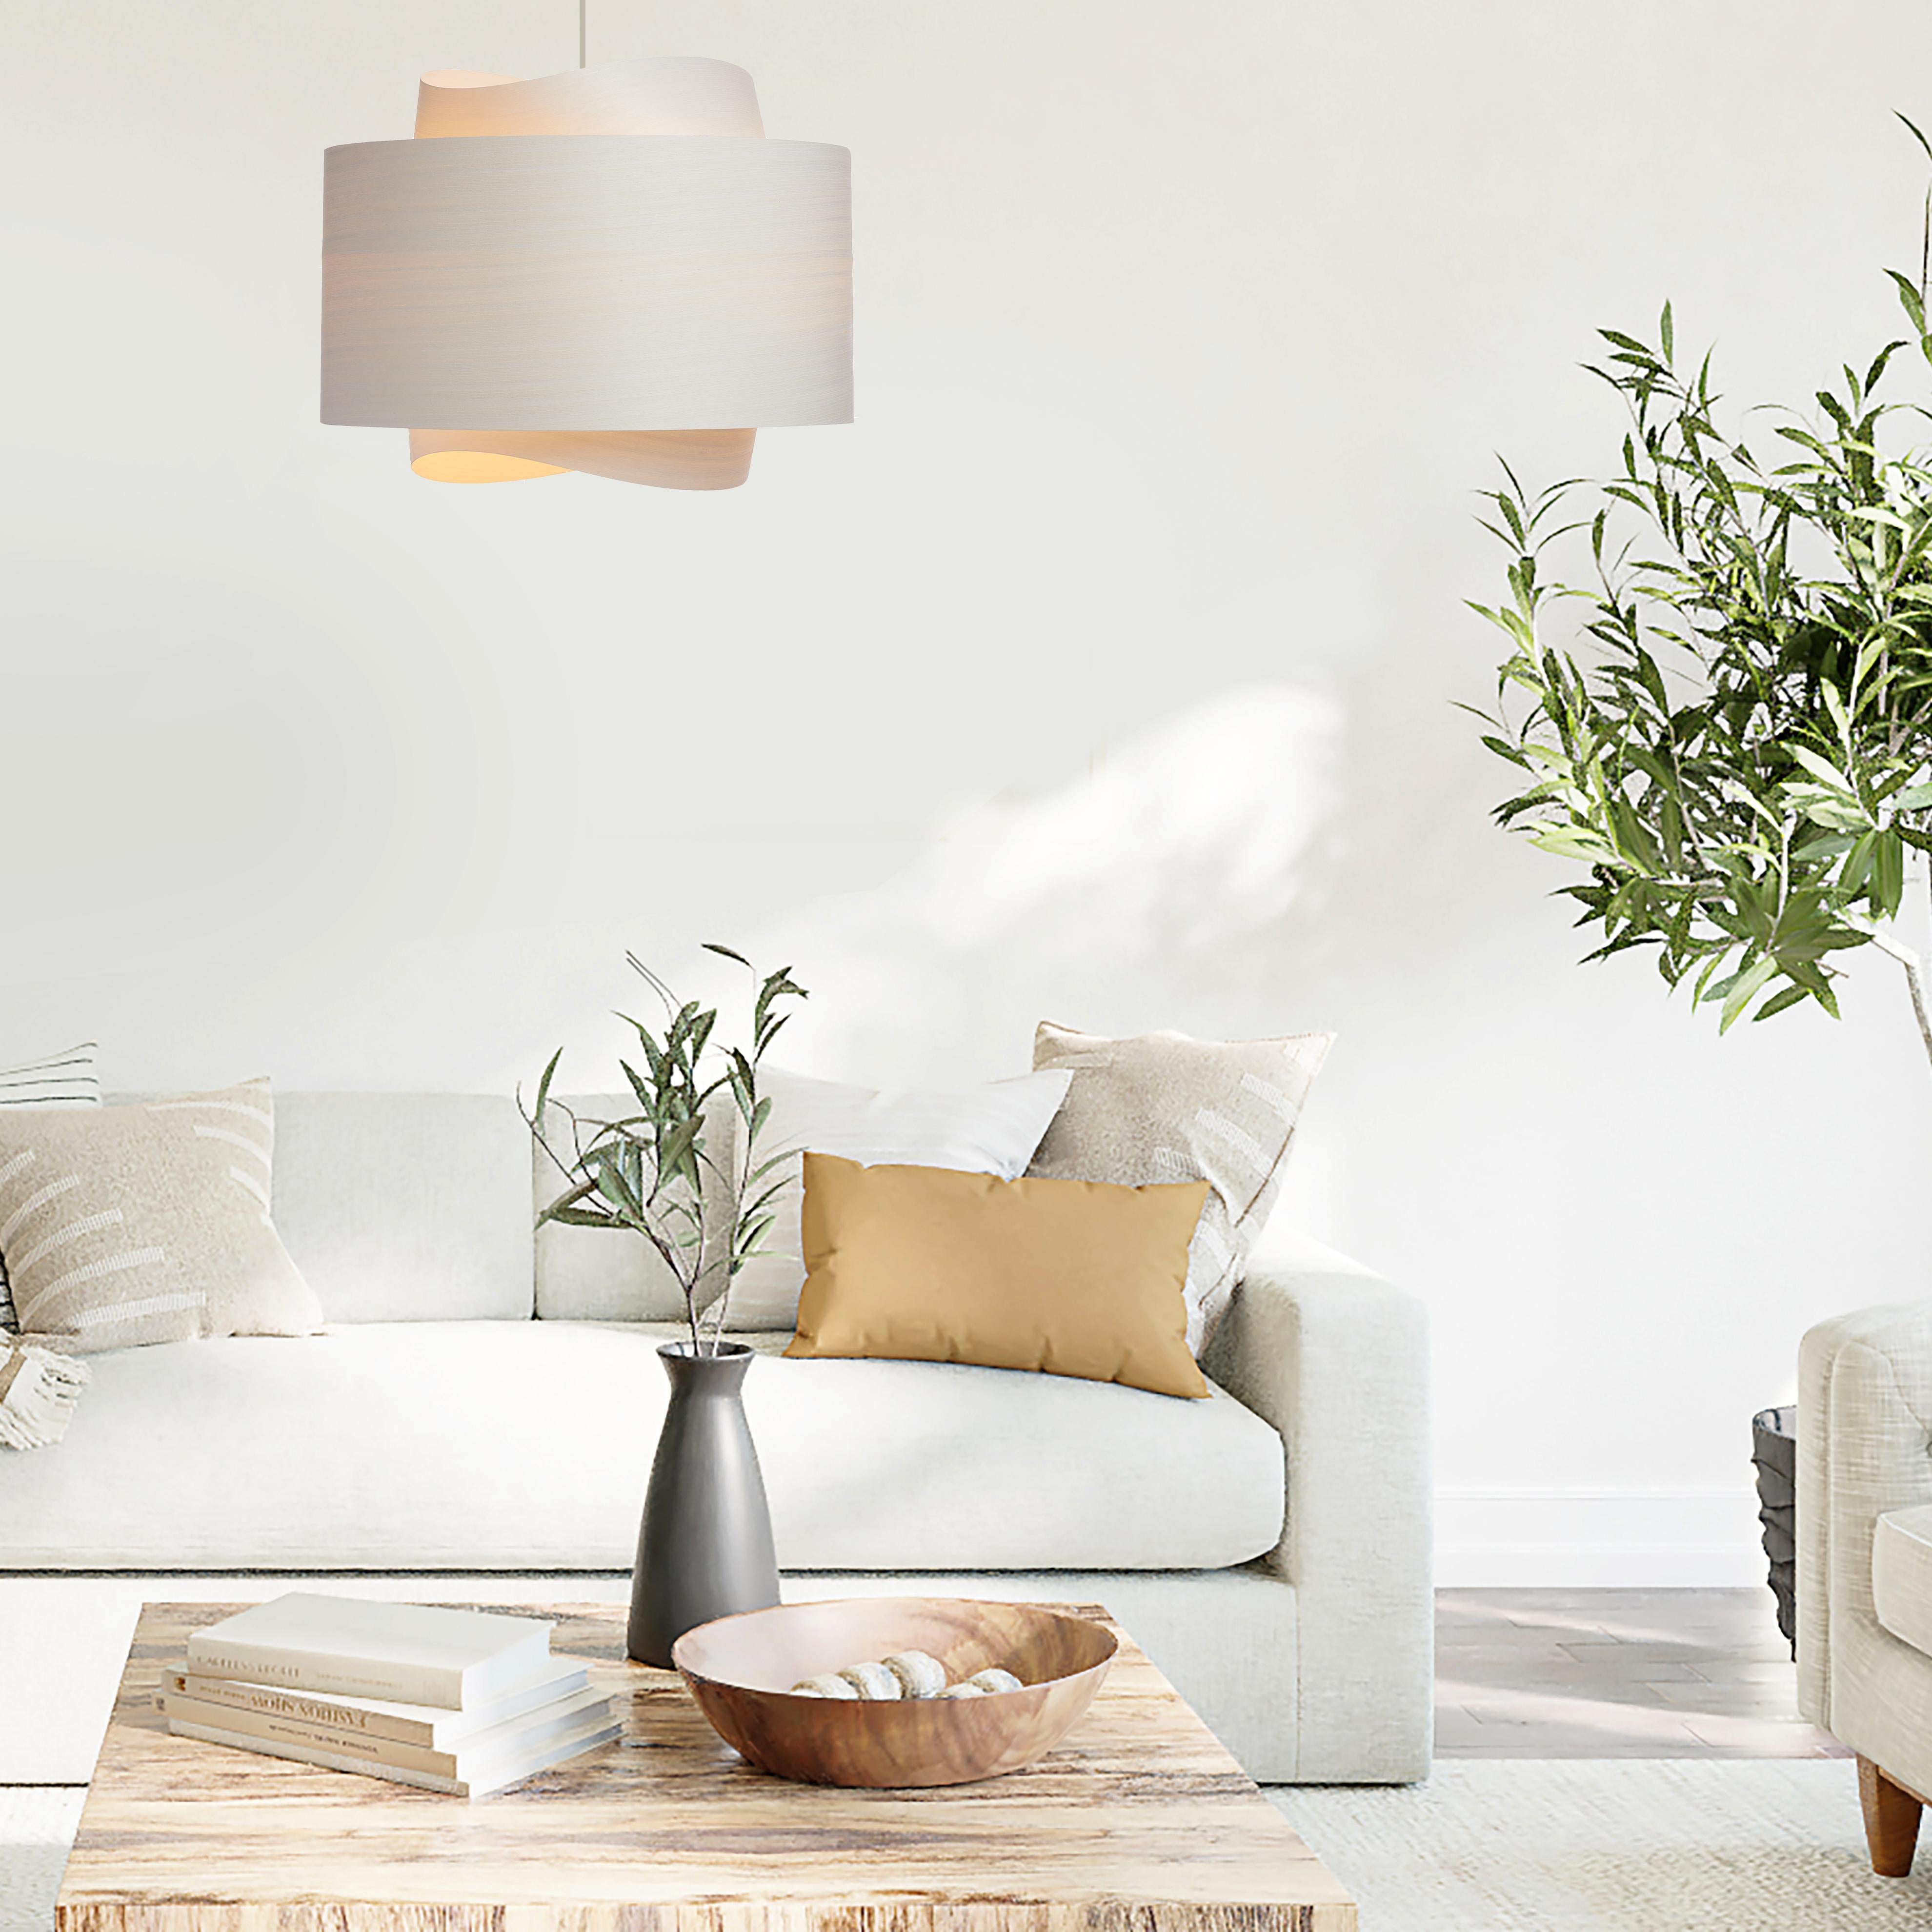 The BOWEN light fixture is a stunning example of contemporary Mid-Century Modern design. With its minimalist silhouette, warm white tones, and unique shape, this pendant light is sure to add a touch of sophistication to any space.

The BOWEN light